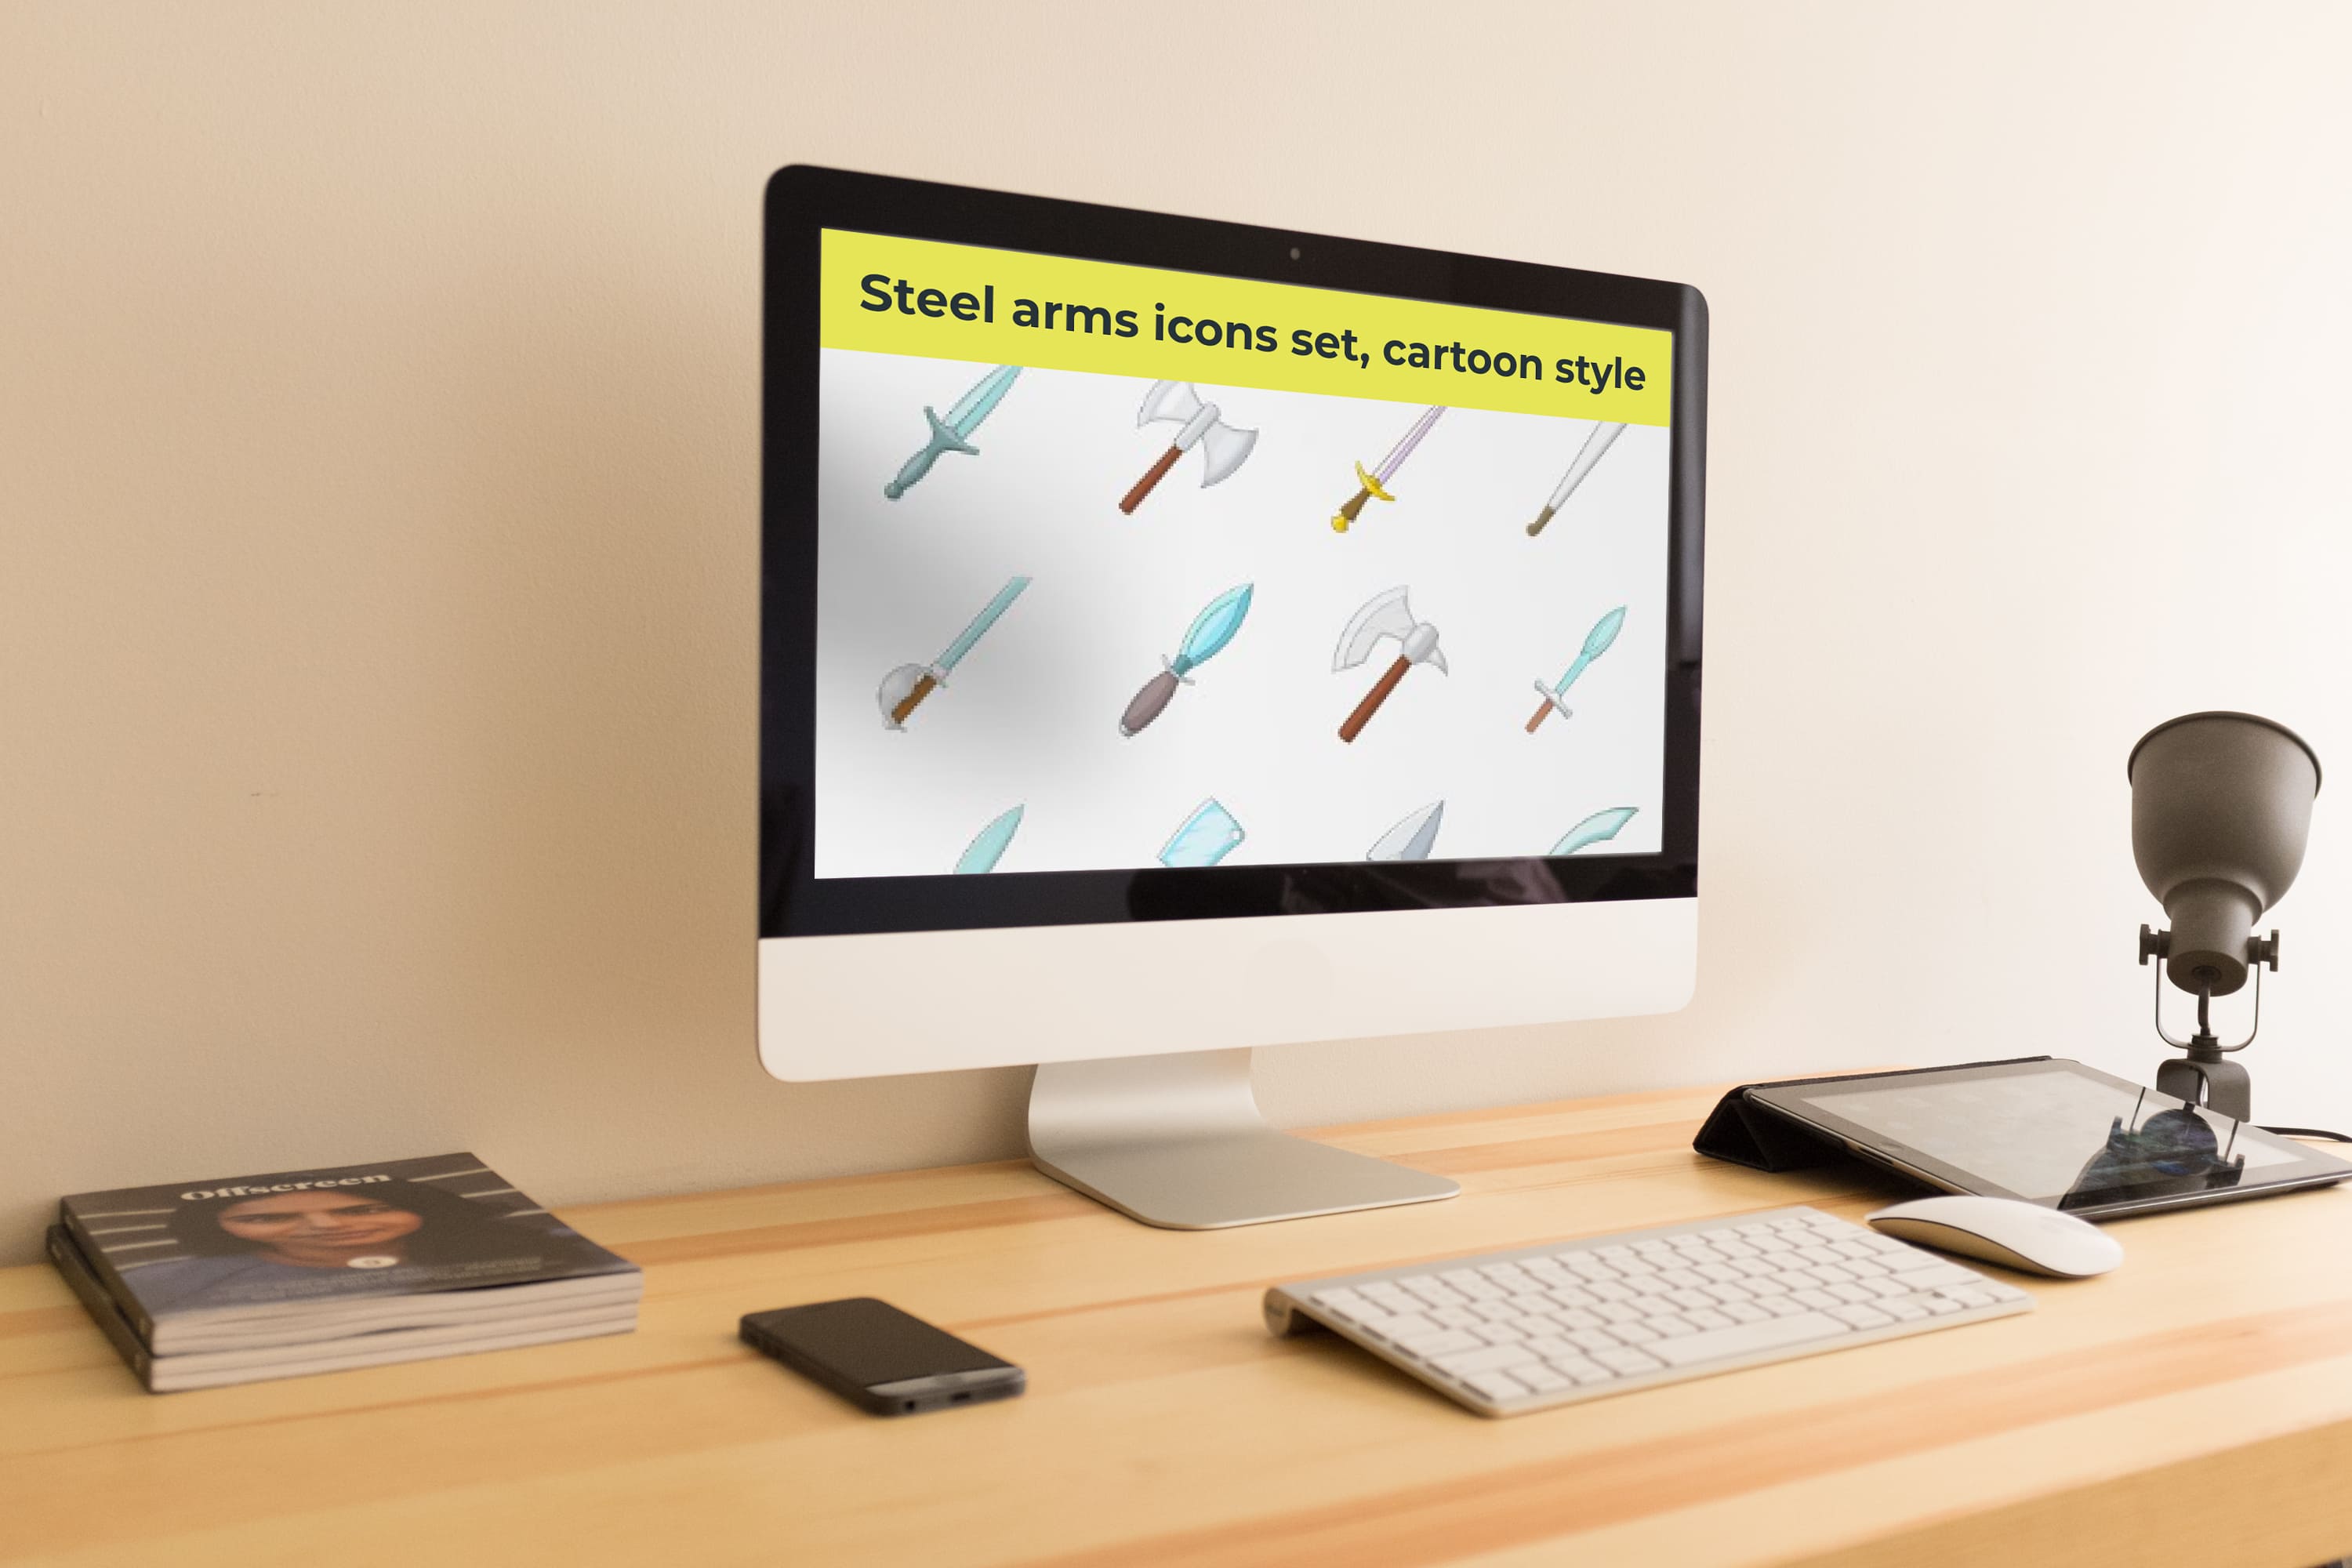 Desktop option of the Steel arms icons set, cartoon style.